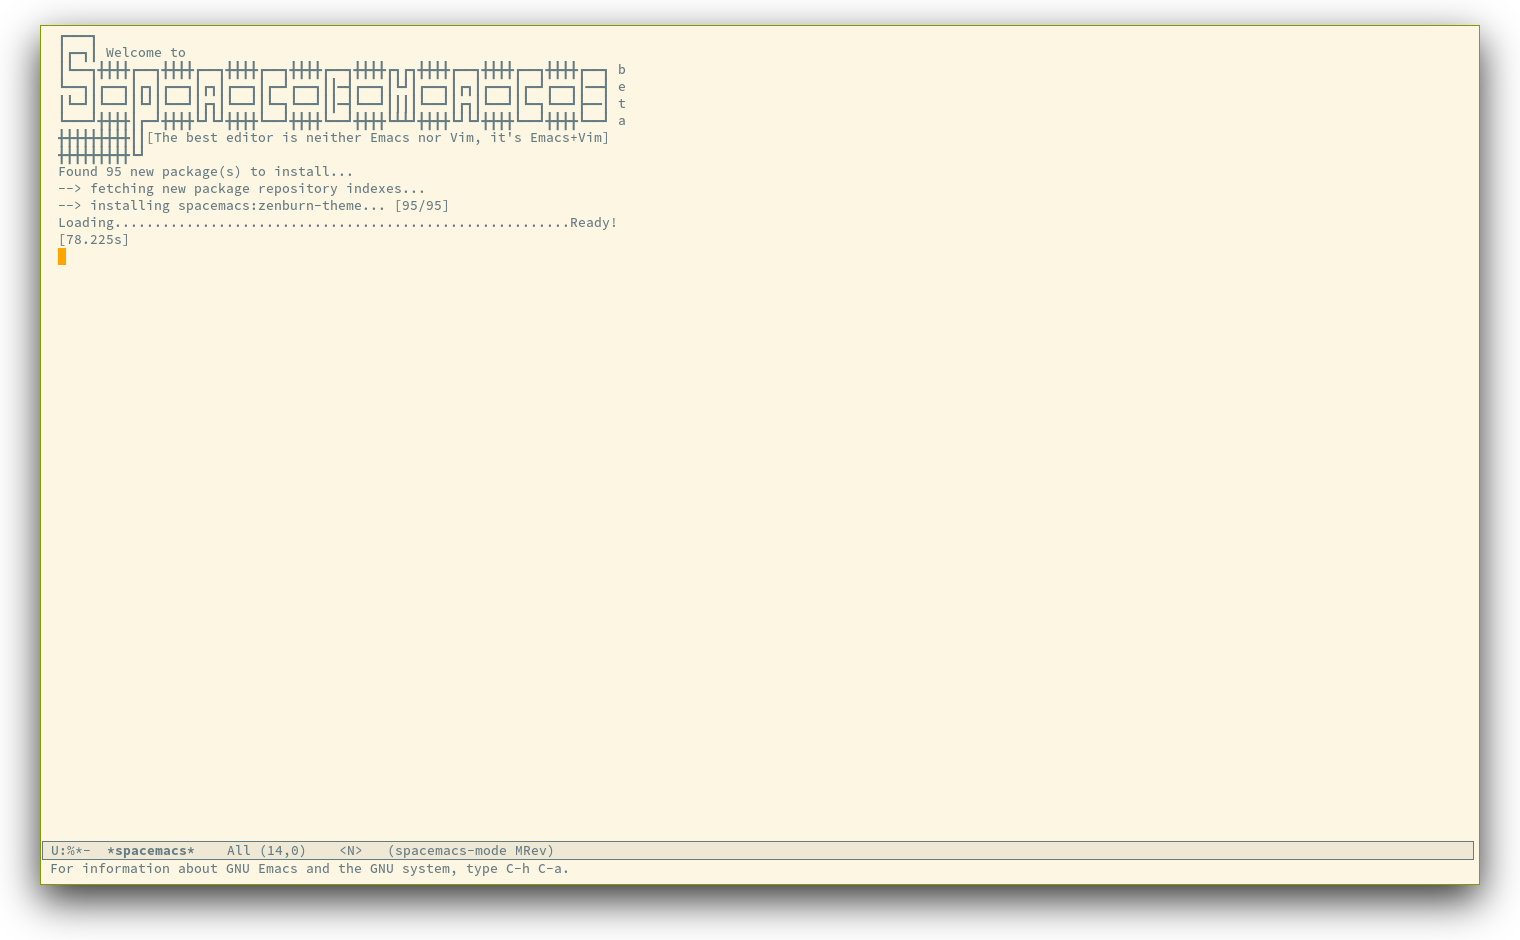 /TakeV/spacemacs/media/commit/8fbfebb95510ca2b69e80adba1ff0c63d713c2a0/doc/img/spacemacs-startup.png